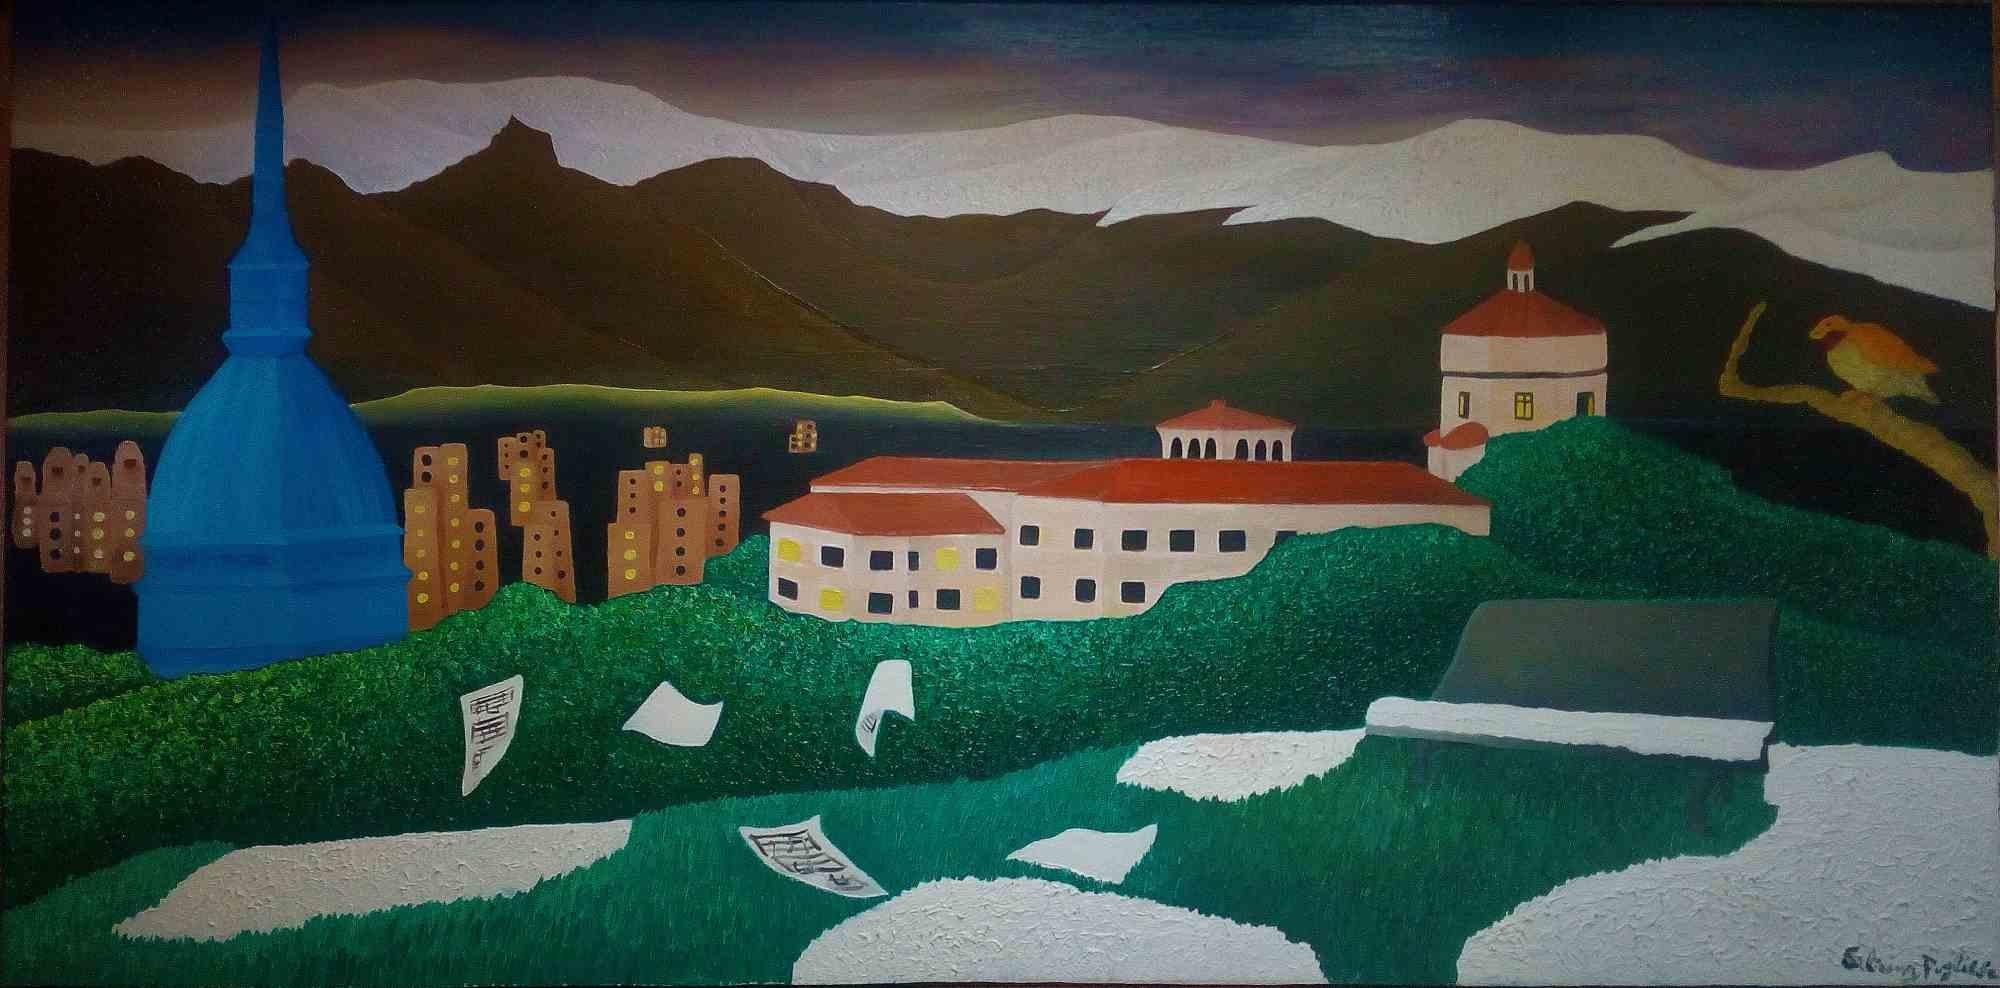 Sabrina Publiese Landscape Painting - The Magic Flute -  Oil Painting on Canvas by S. Pugliese - 2019